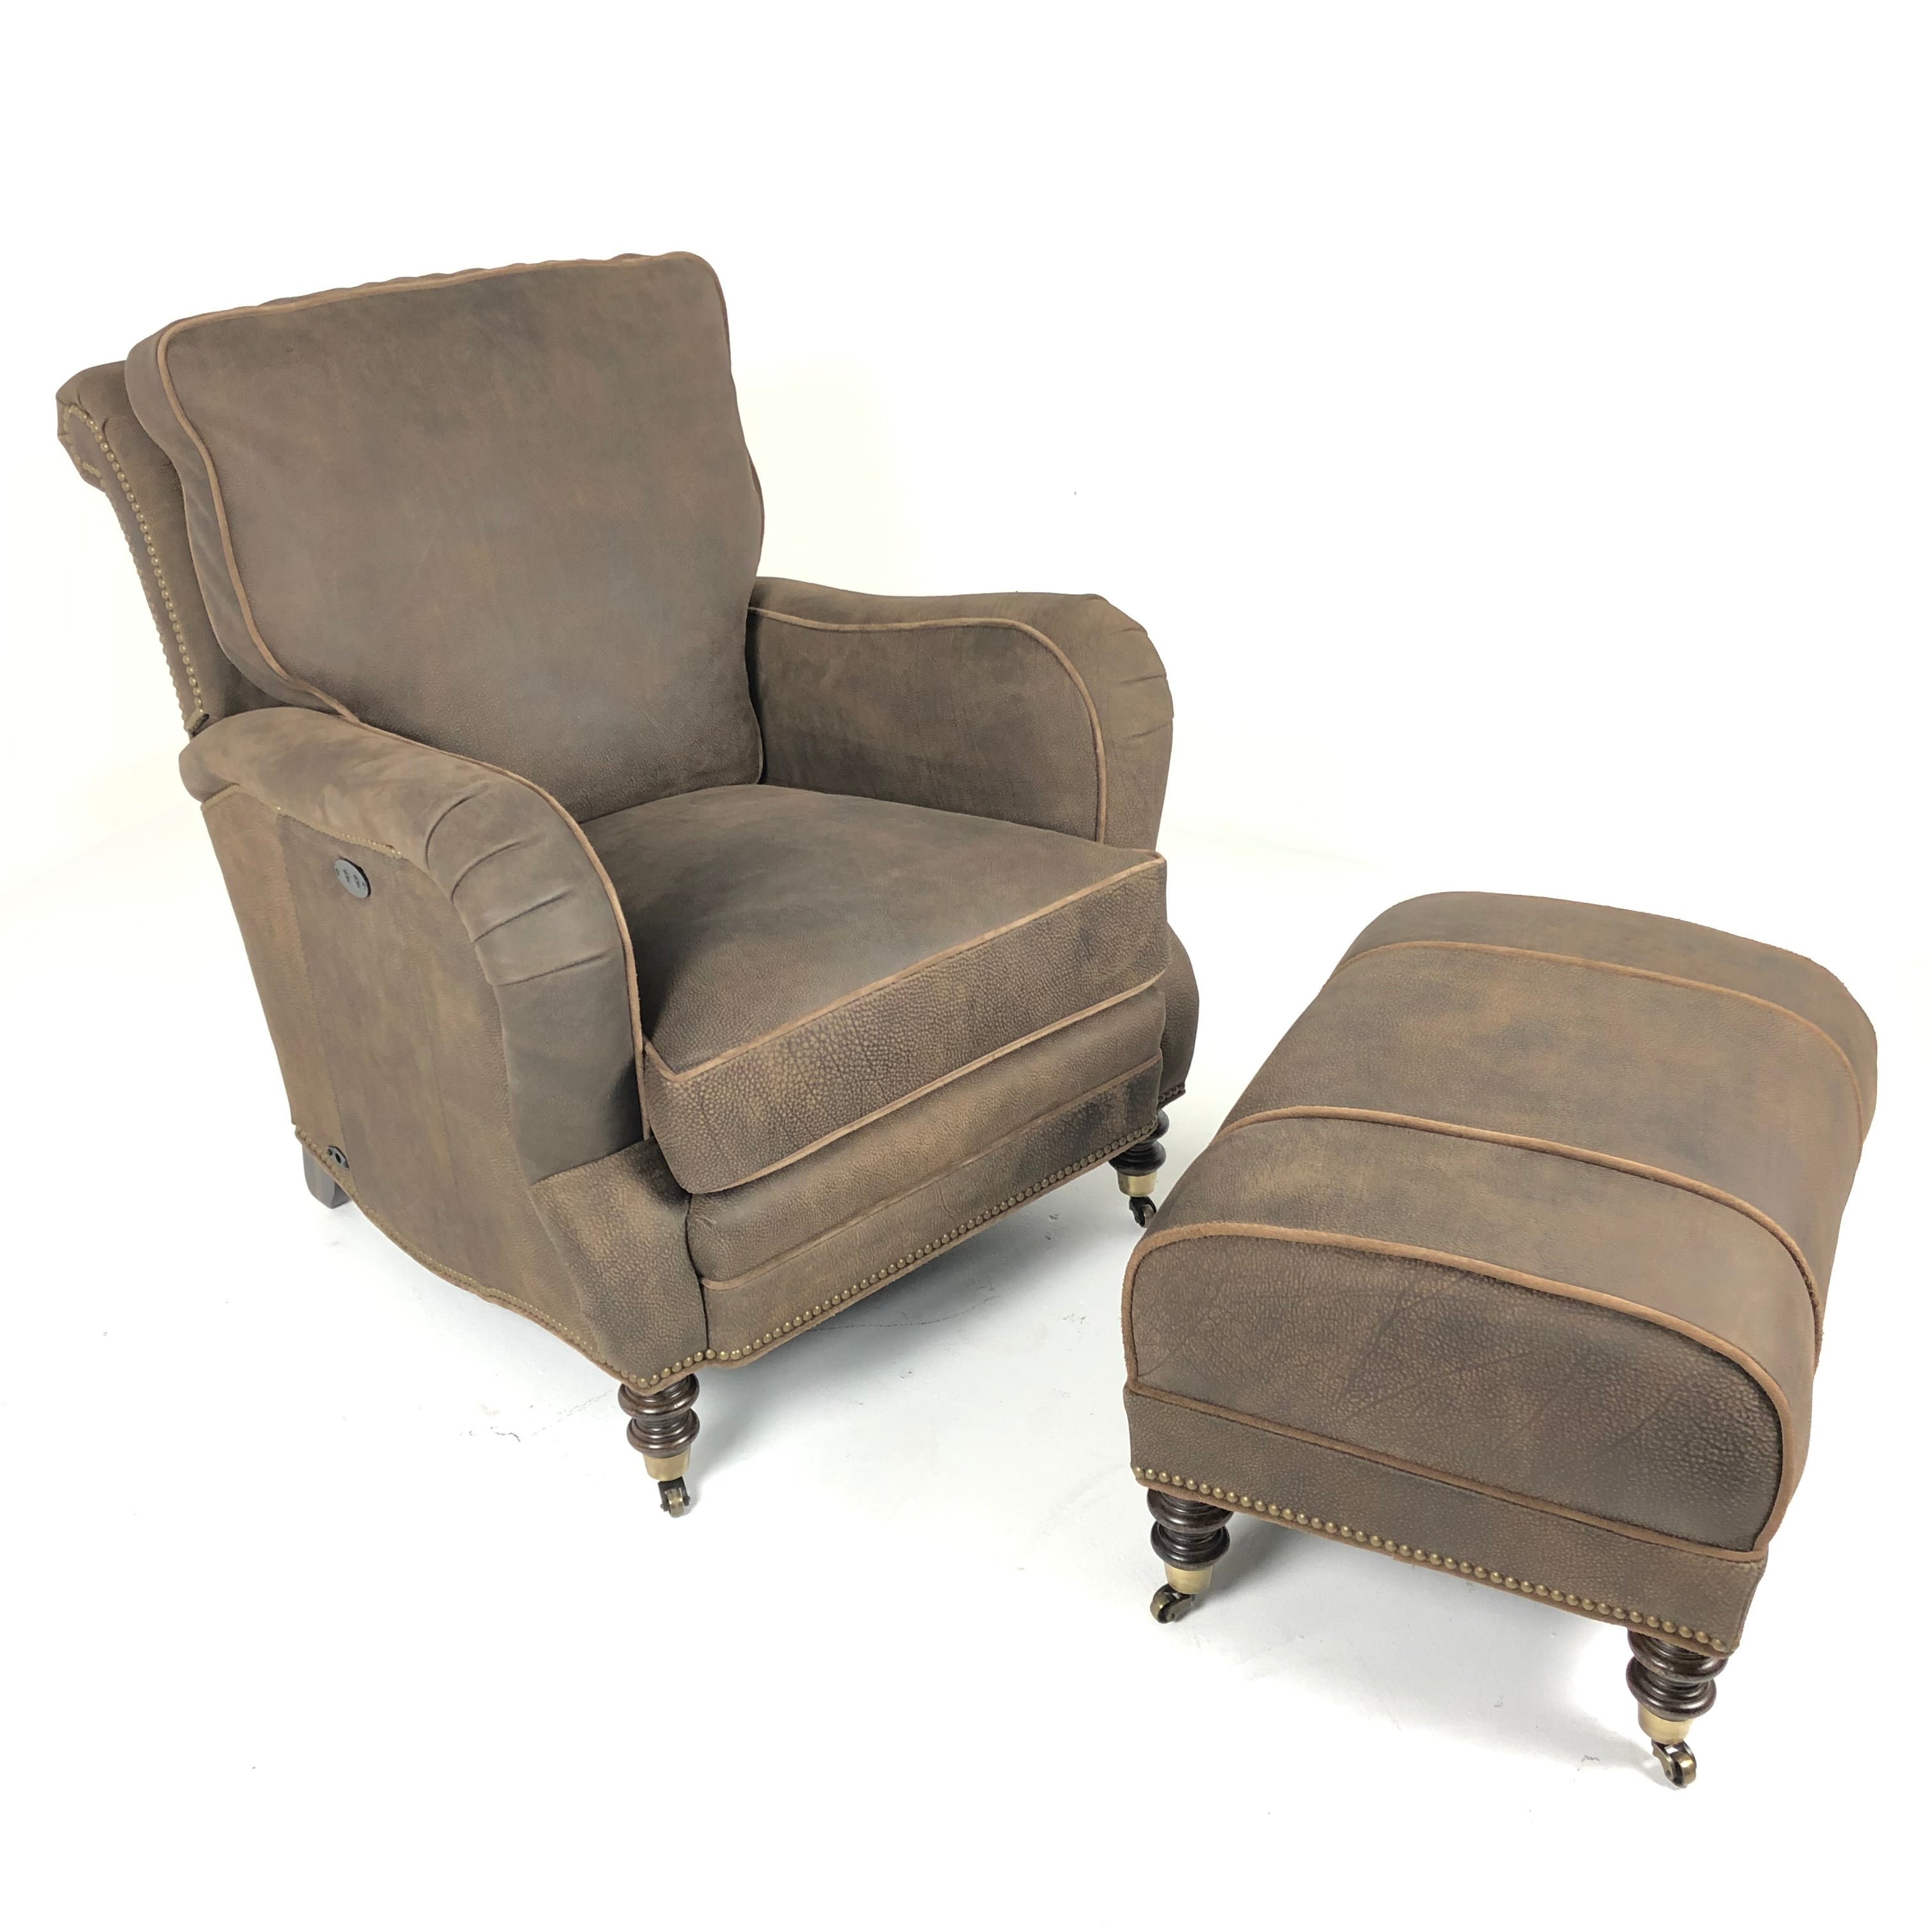 Cyrus Leather Tilt Back Chair & Ottoman by Wesley Hall shown in Zulu Chocolate leather - view from above